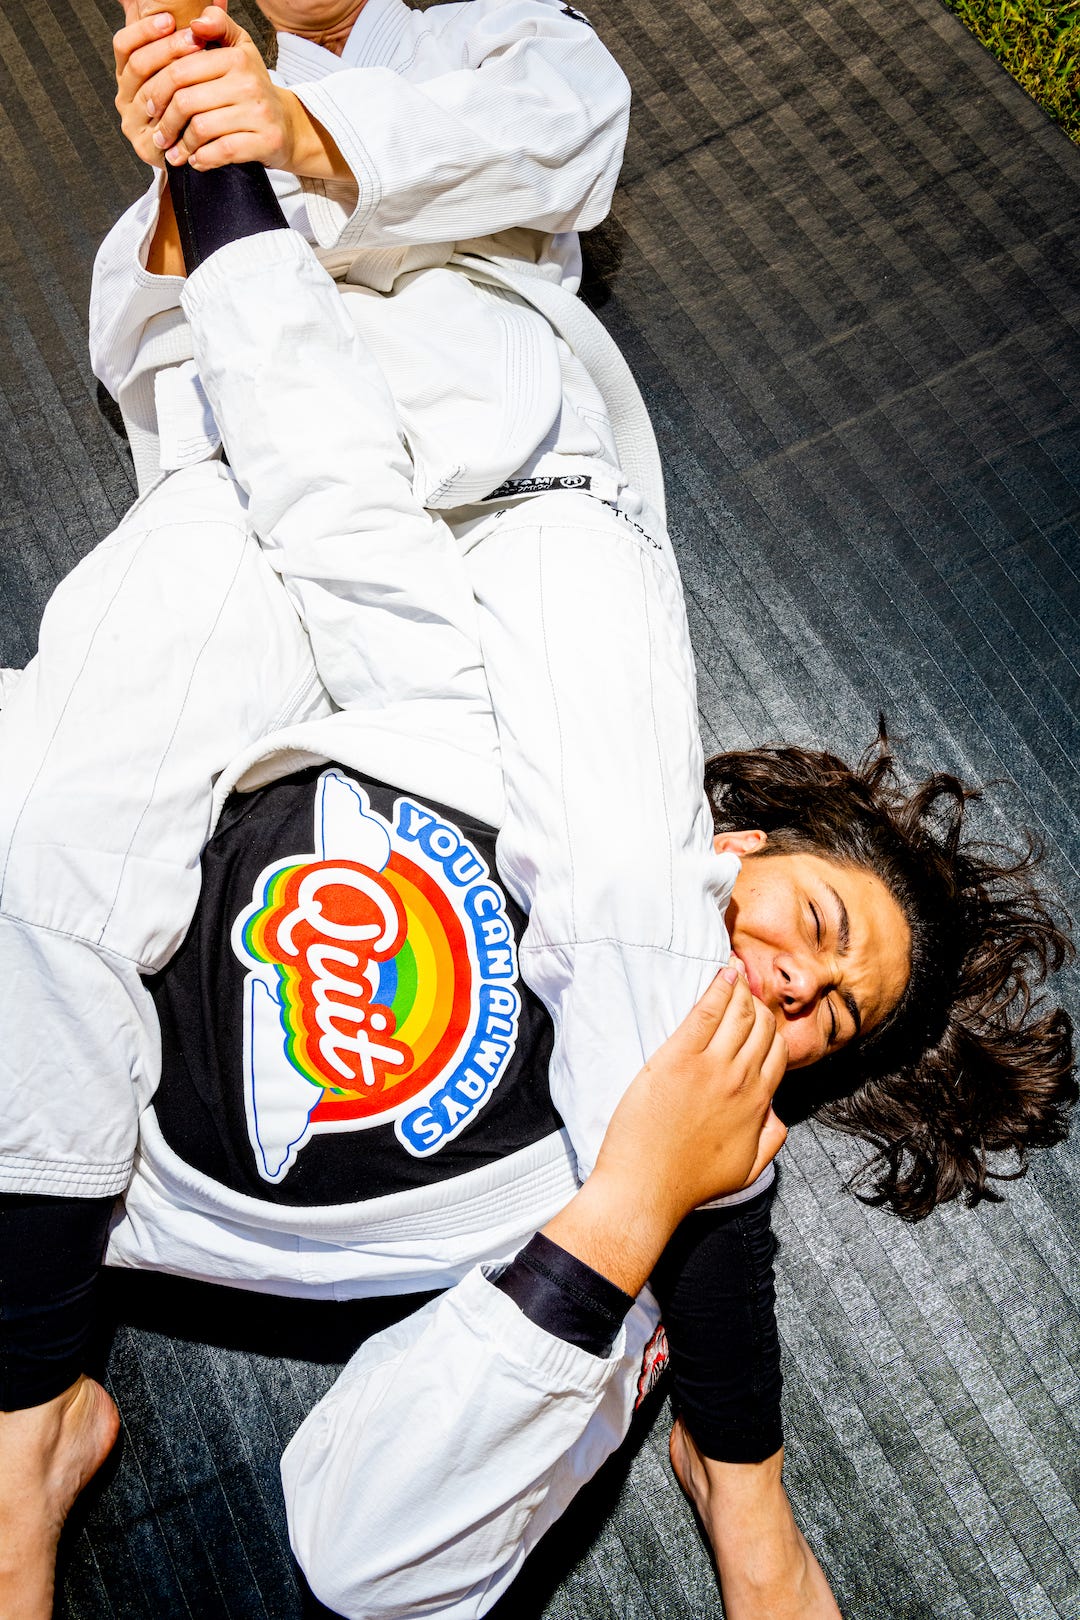 A martial artist in a submission hold, wearing a white gi over a You Can Always Quit t-shirt in black, lies on the floor a scrunches his eyes closed. He is just about to quit, and rightly so.